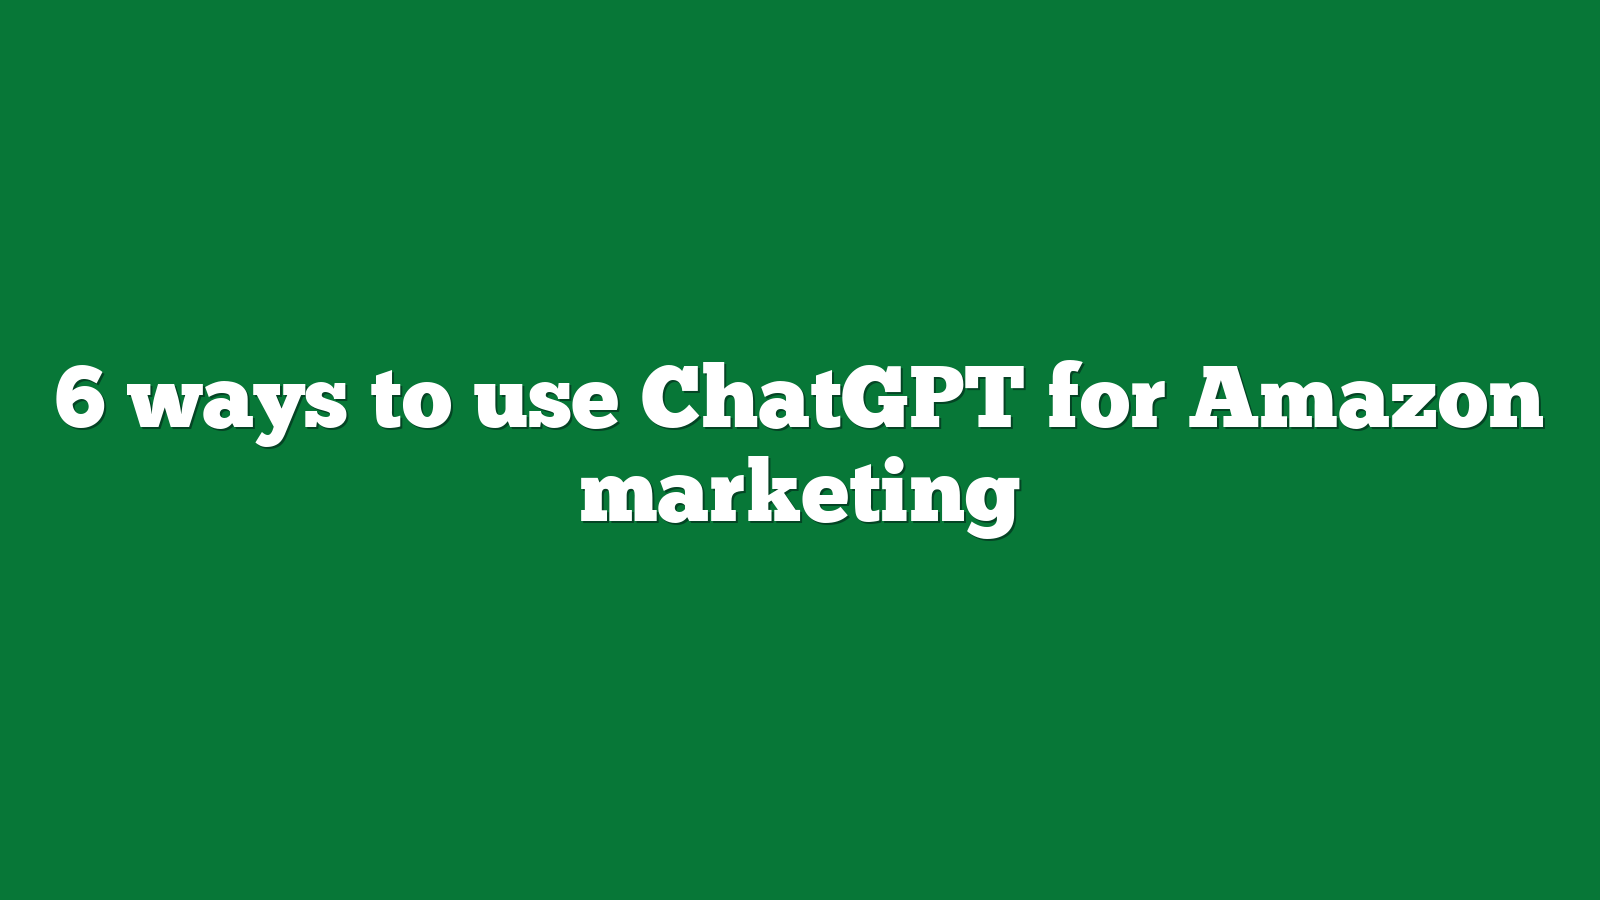 6 ways to use ChatGPT for Amazon marketing